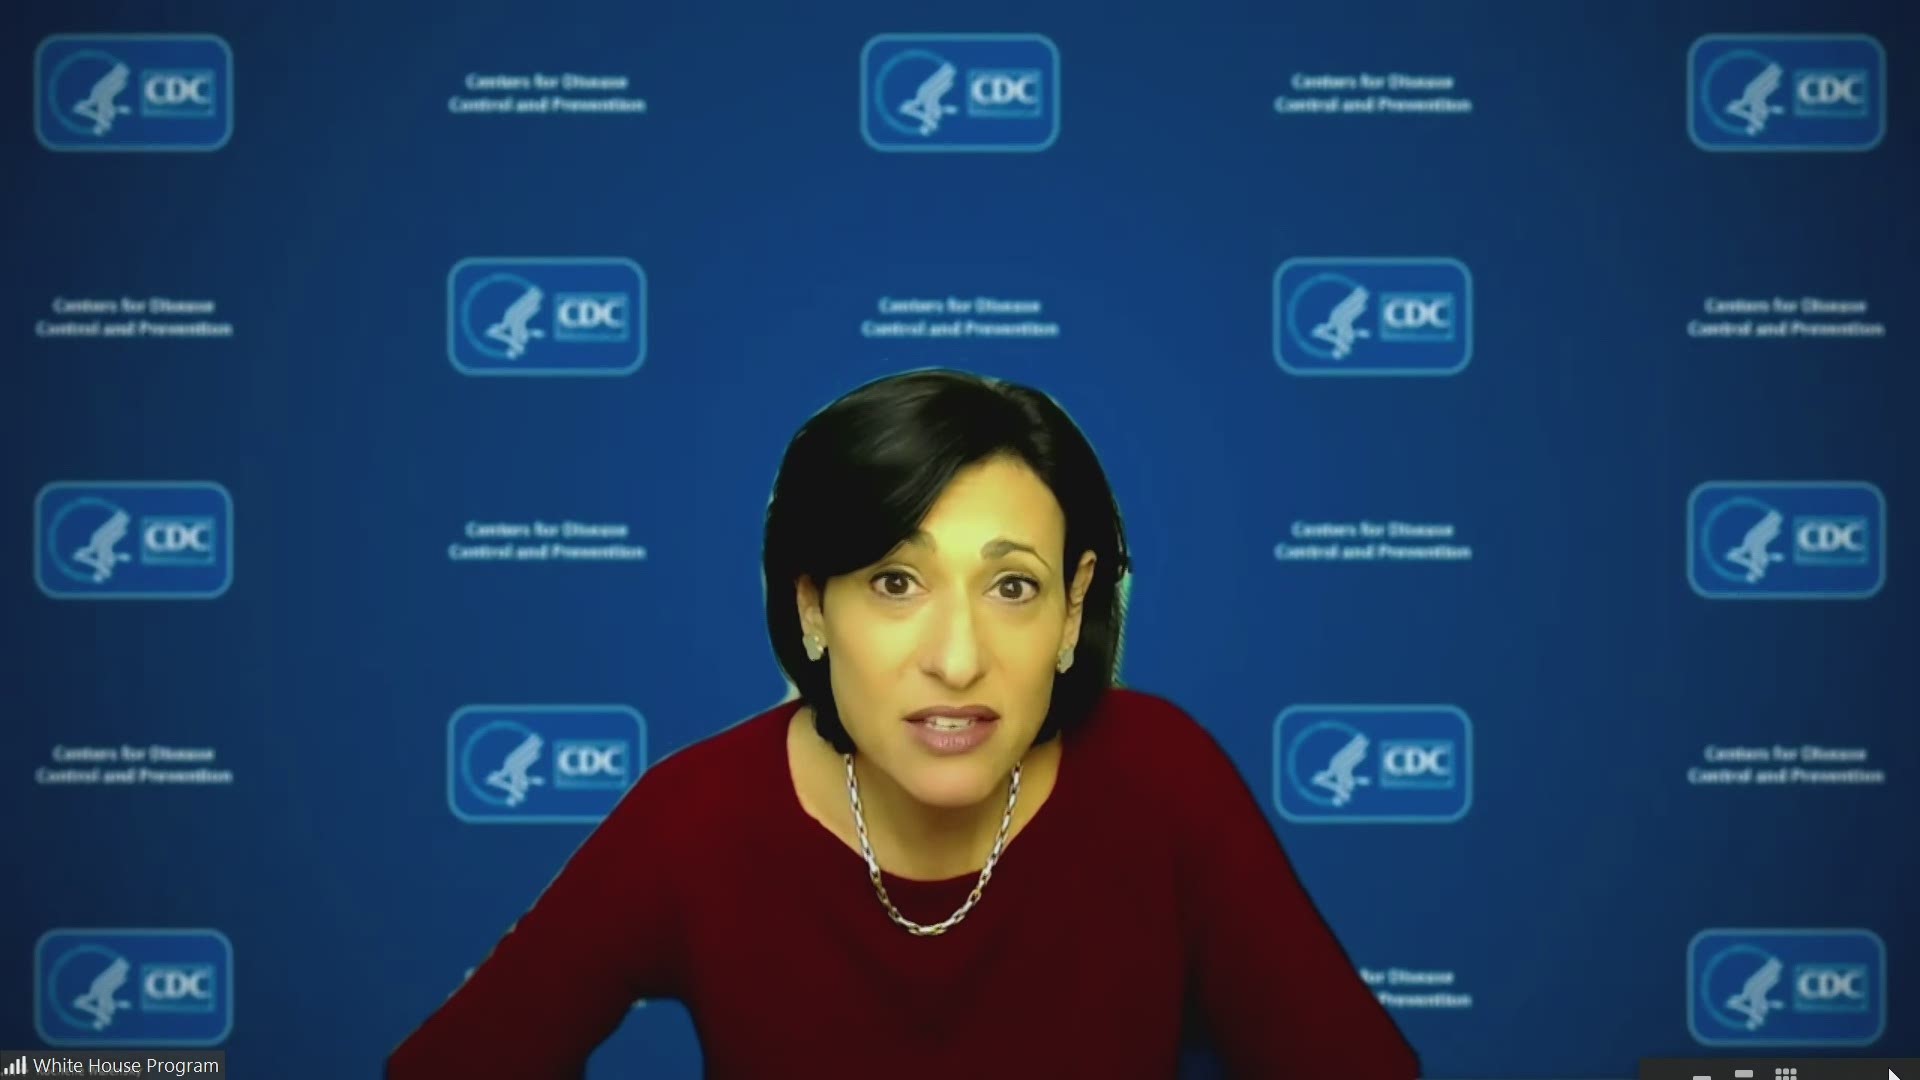 CDC director discusses the impacts of emerging COVID-19 variants and states lifting restrictions.